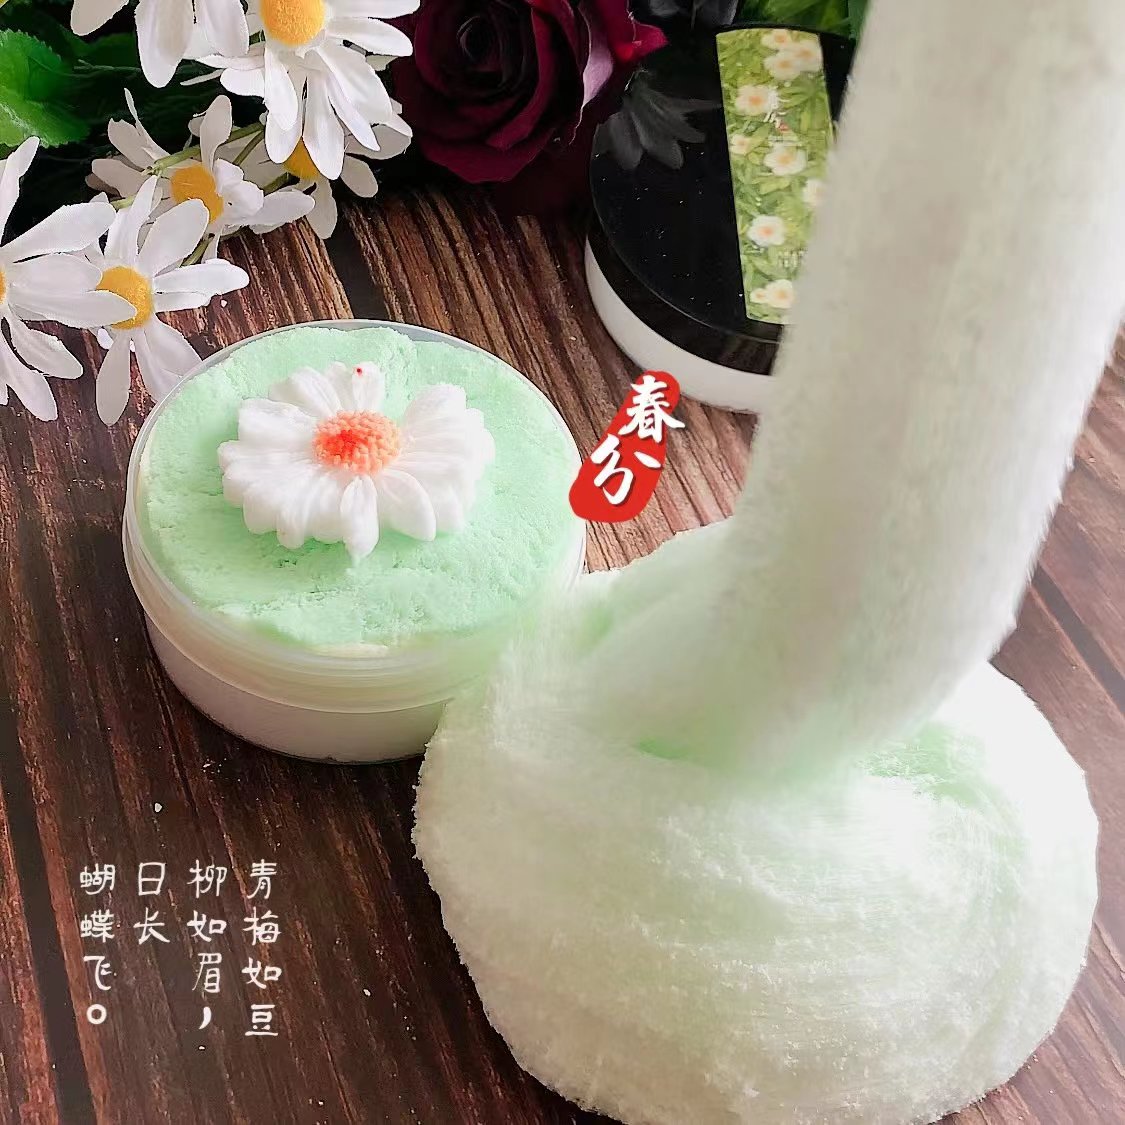 MAMIYA Spring Summer Autumn Towel Cloud Slime Amazing Fluffy Pretty Slime 160ml 5.4oz ( Not Included in the Slime Bundle)